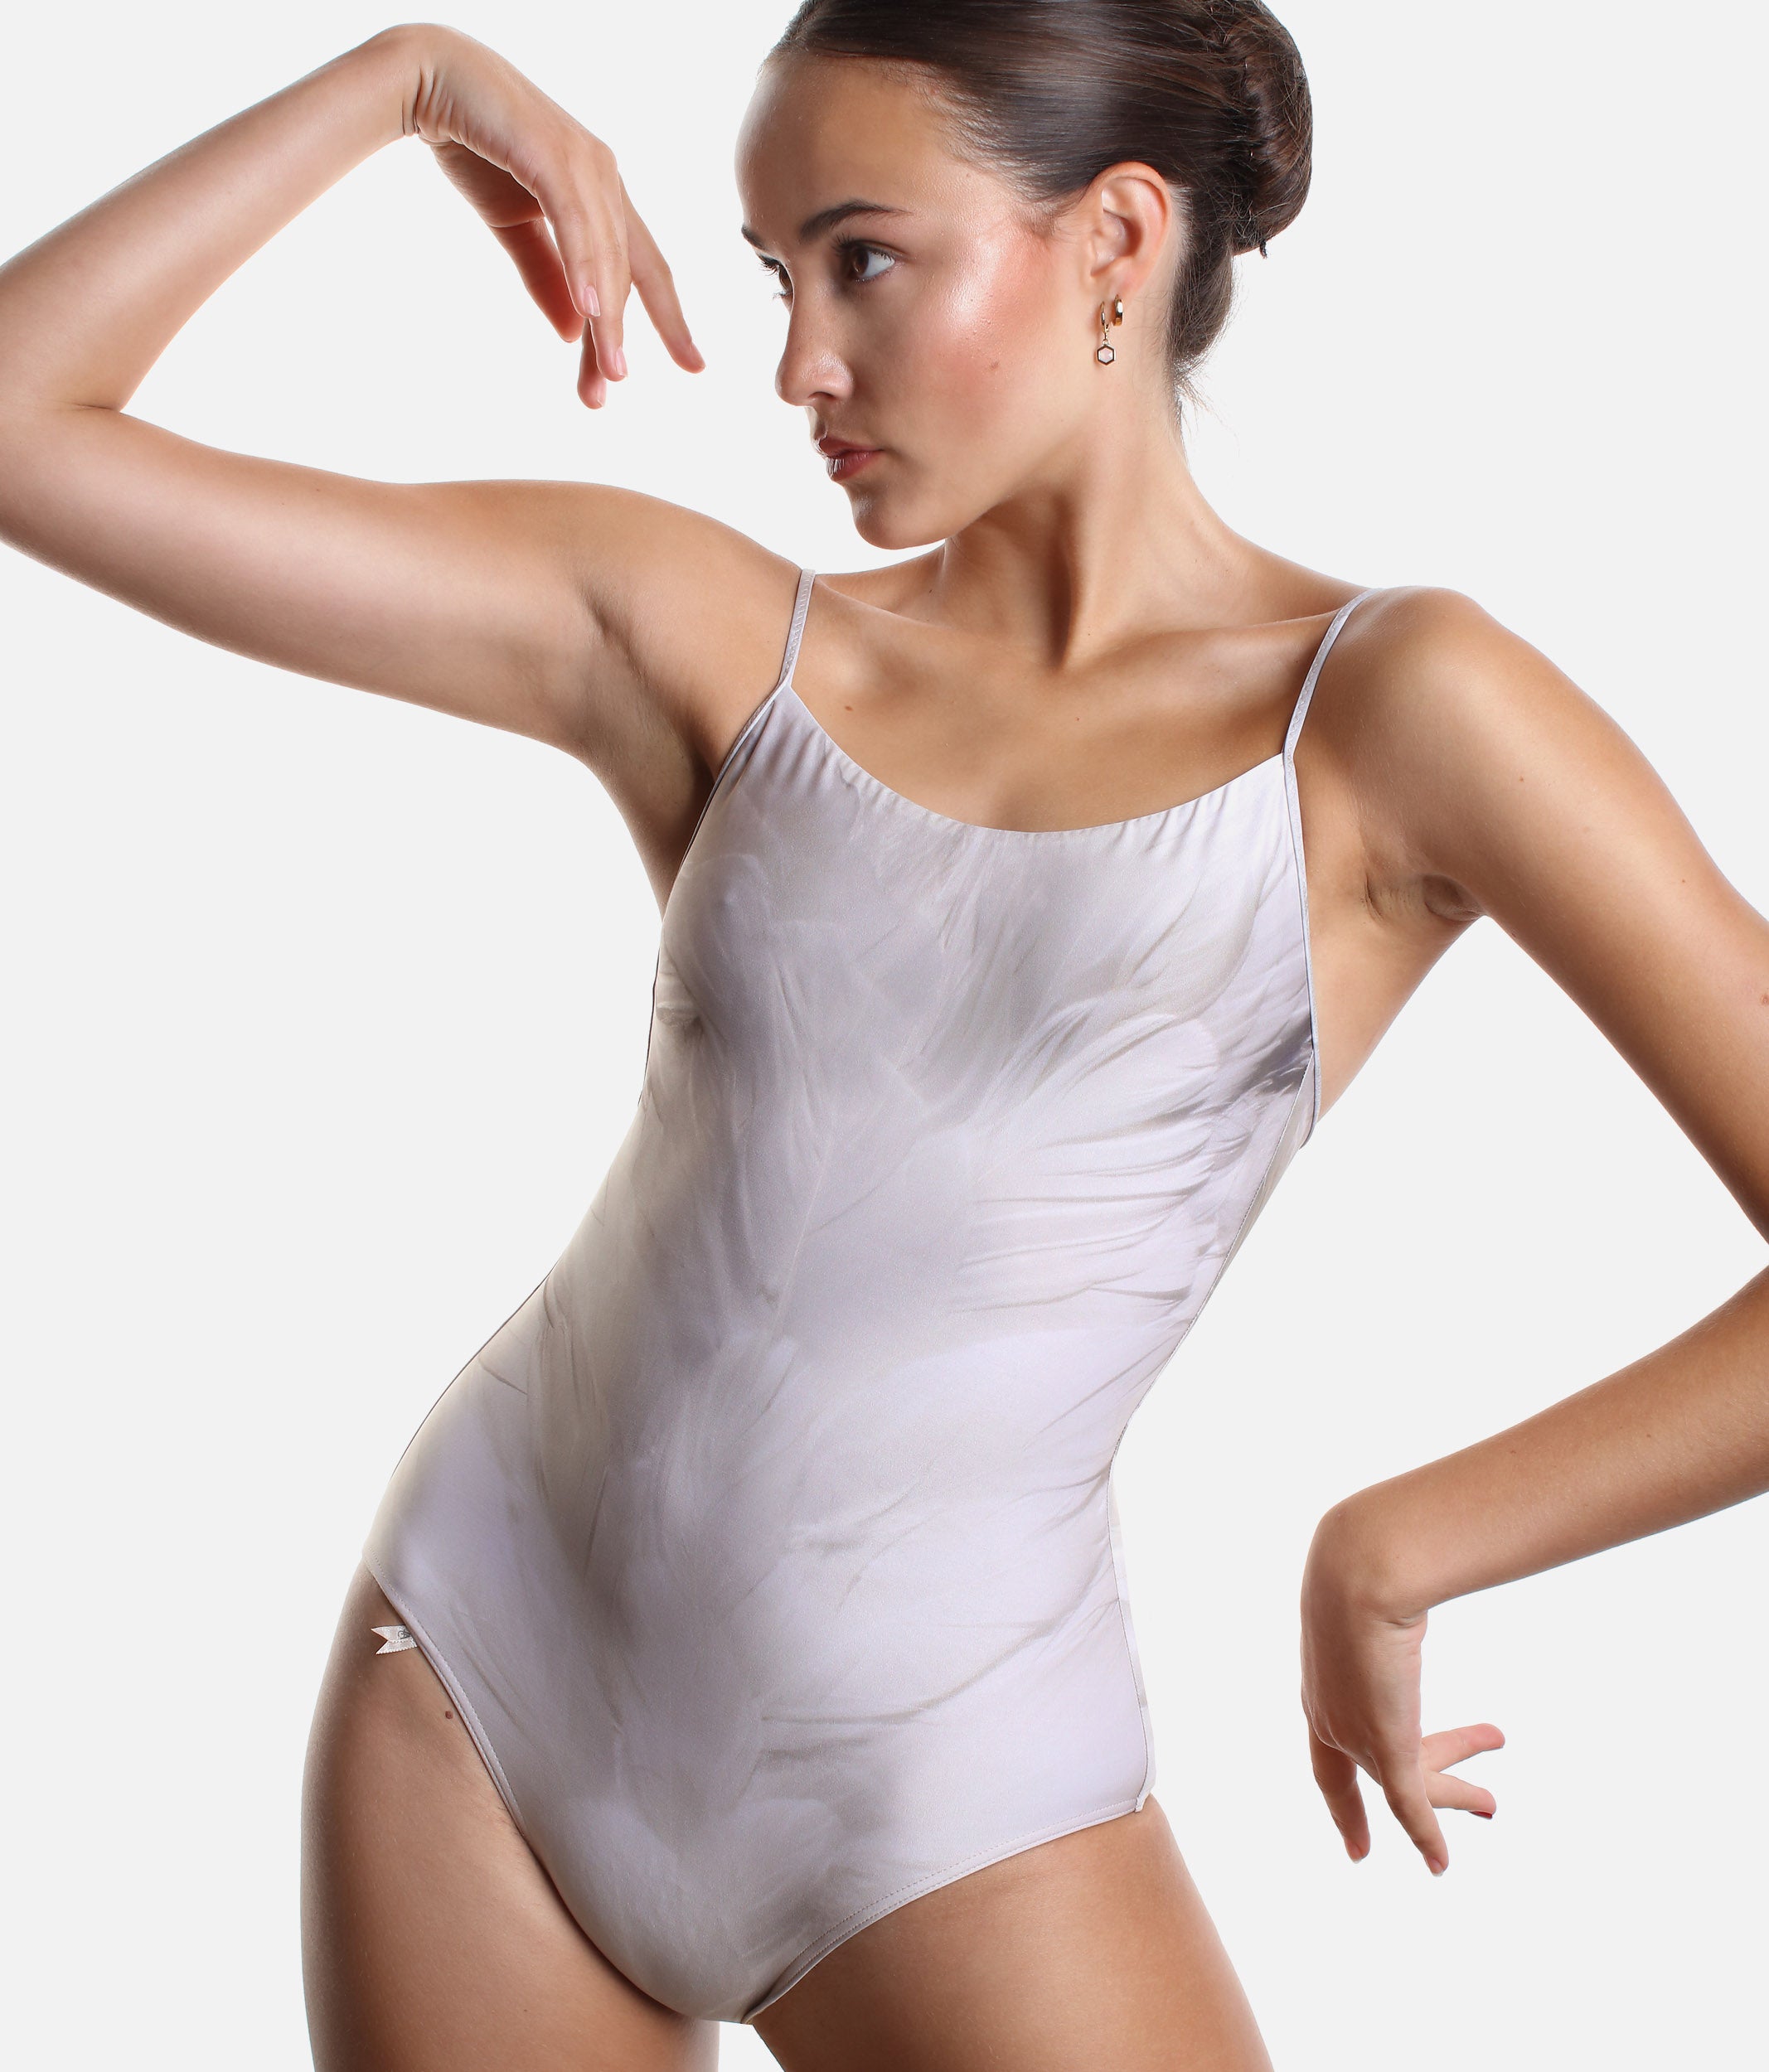 JUst A Corpse Classic Camisole Leotard, SWAN - Dance World